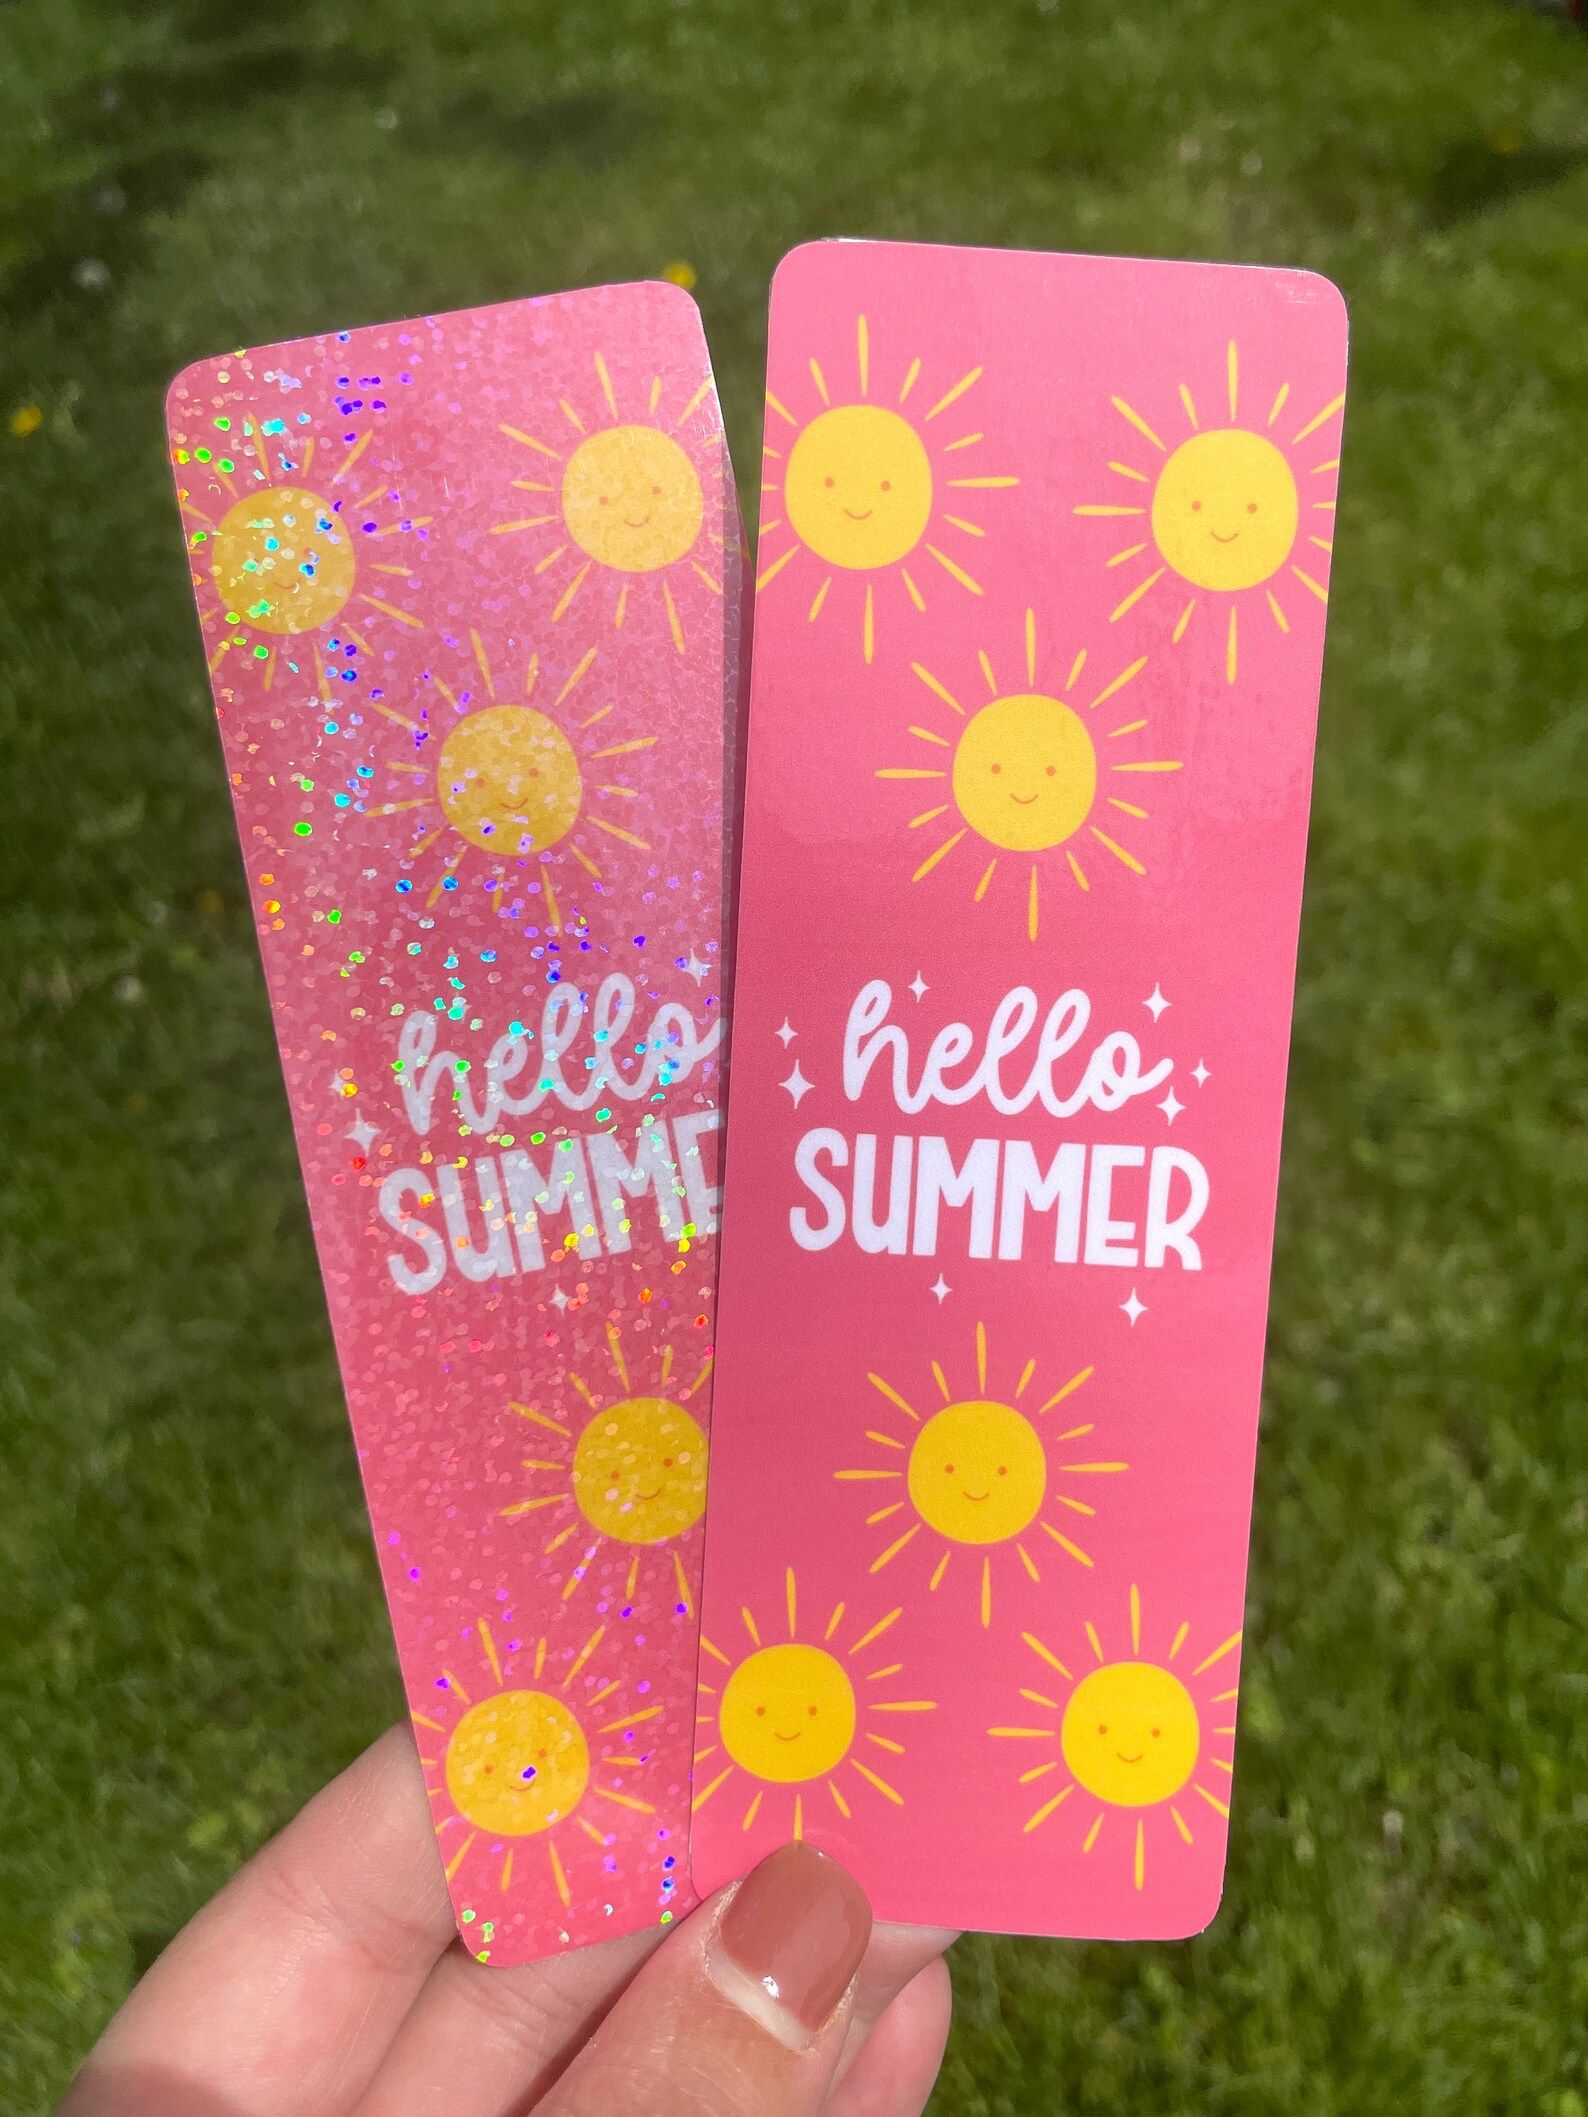 image of two pink bookmarks with yellow suns and glitter that say "hello summer." 